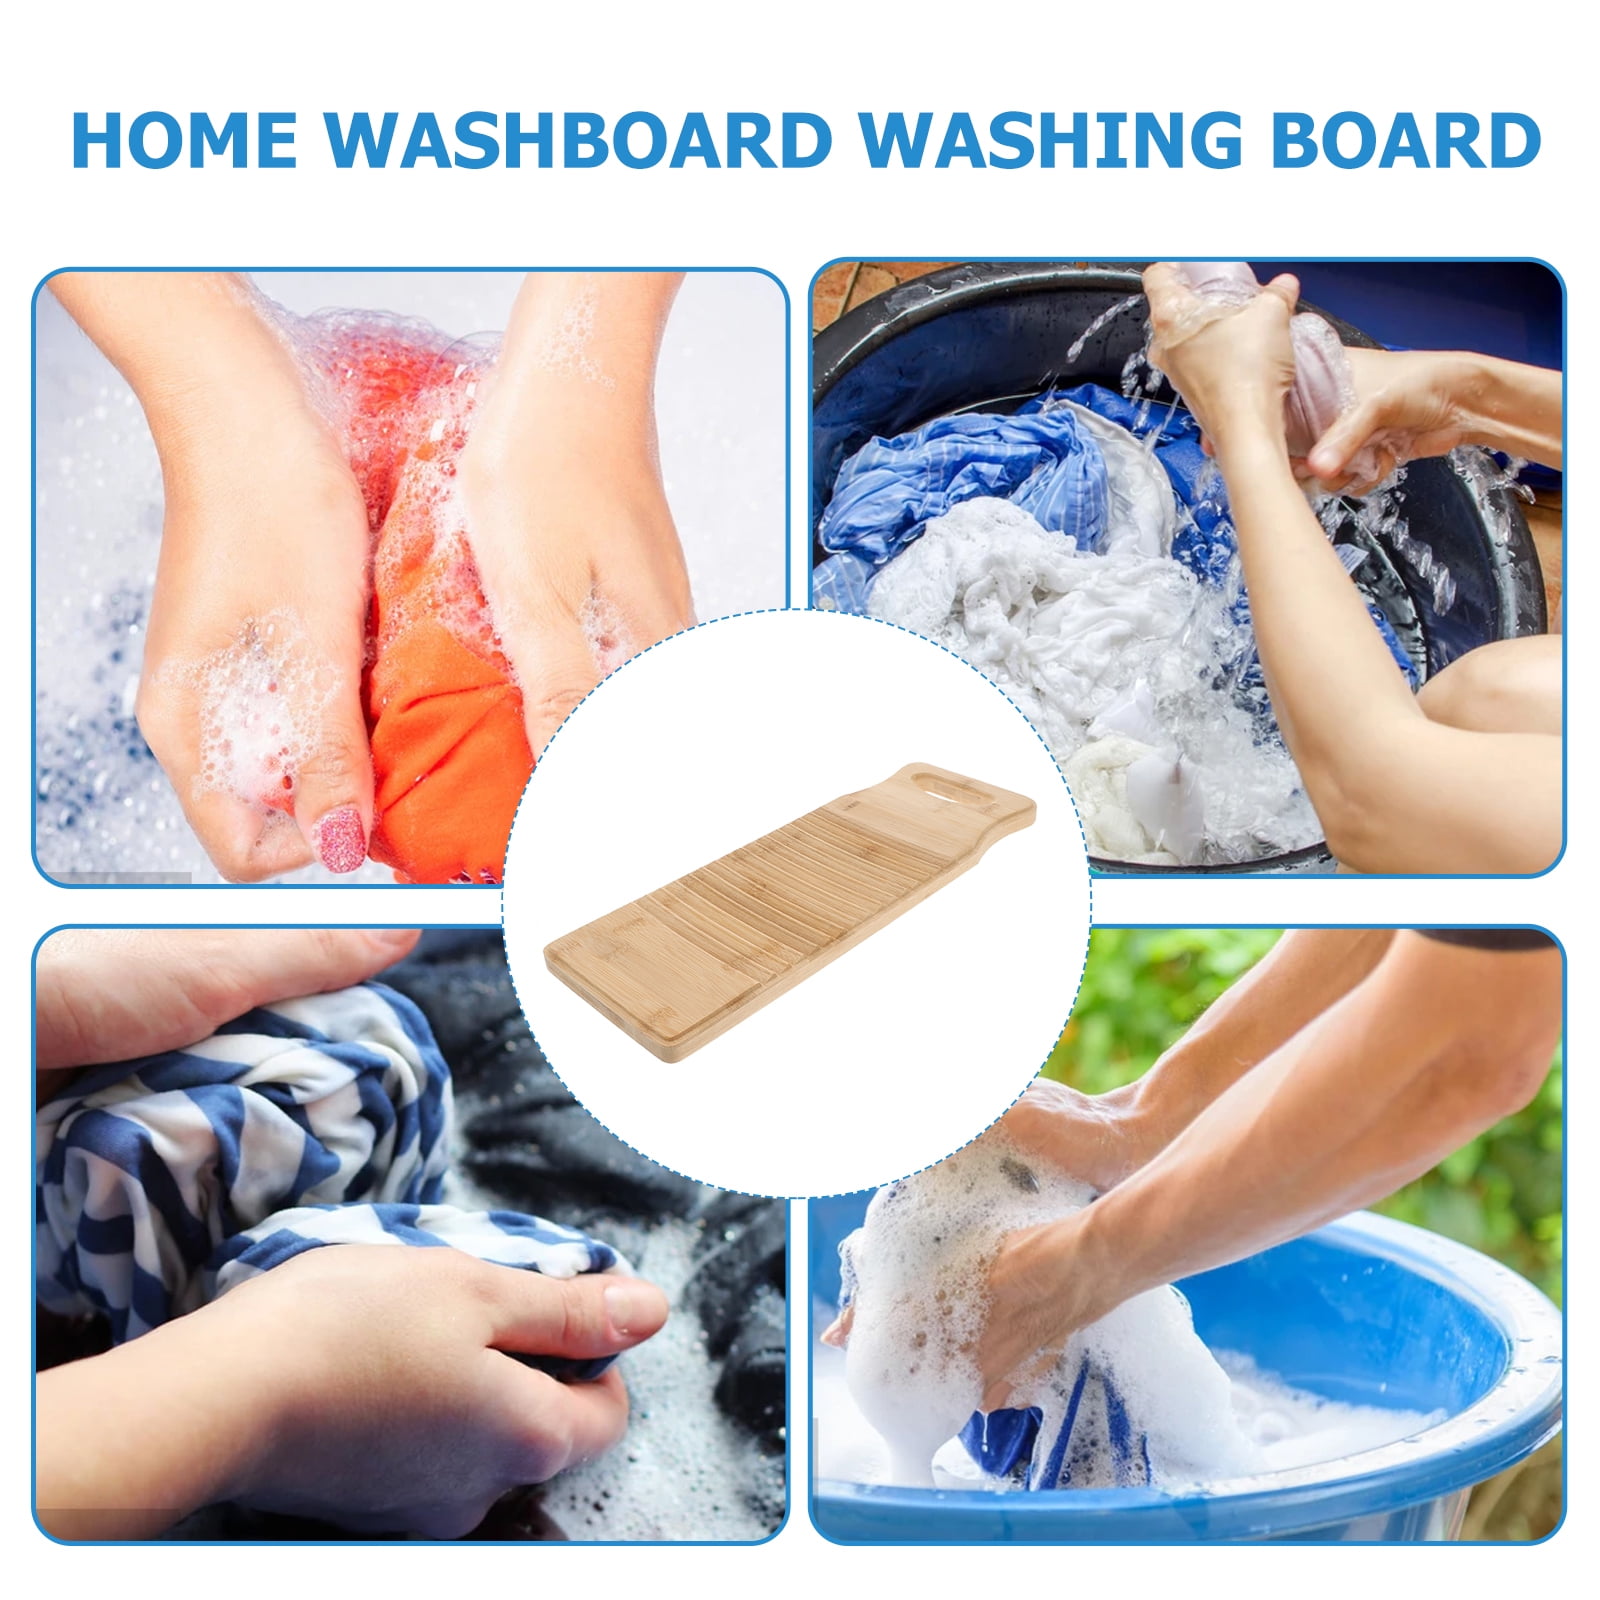 RCFINE Washboard Bamboo Laundry Washboard Hand Wash Board for Hand Washing  Clothes Anti-Slip Household Tools Vintage Decor (A,M)